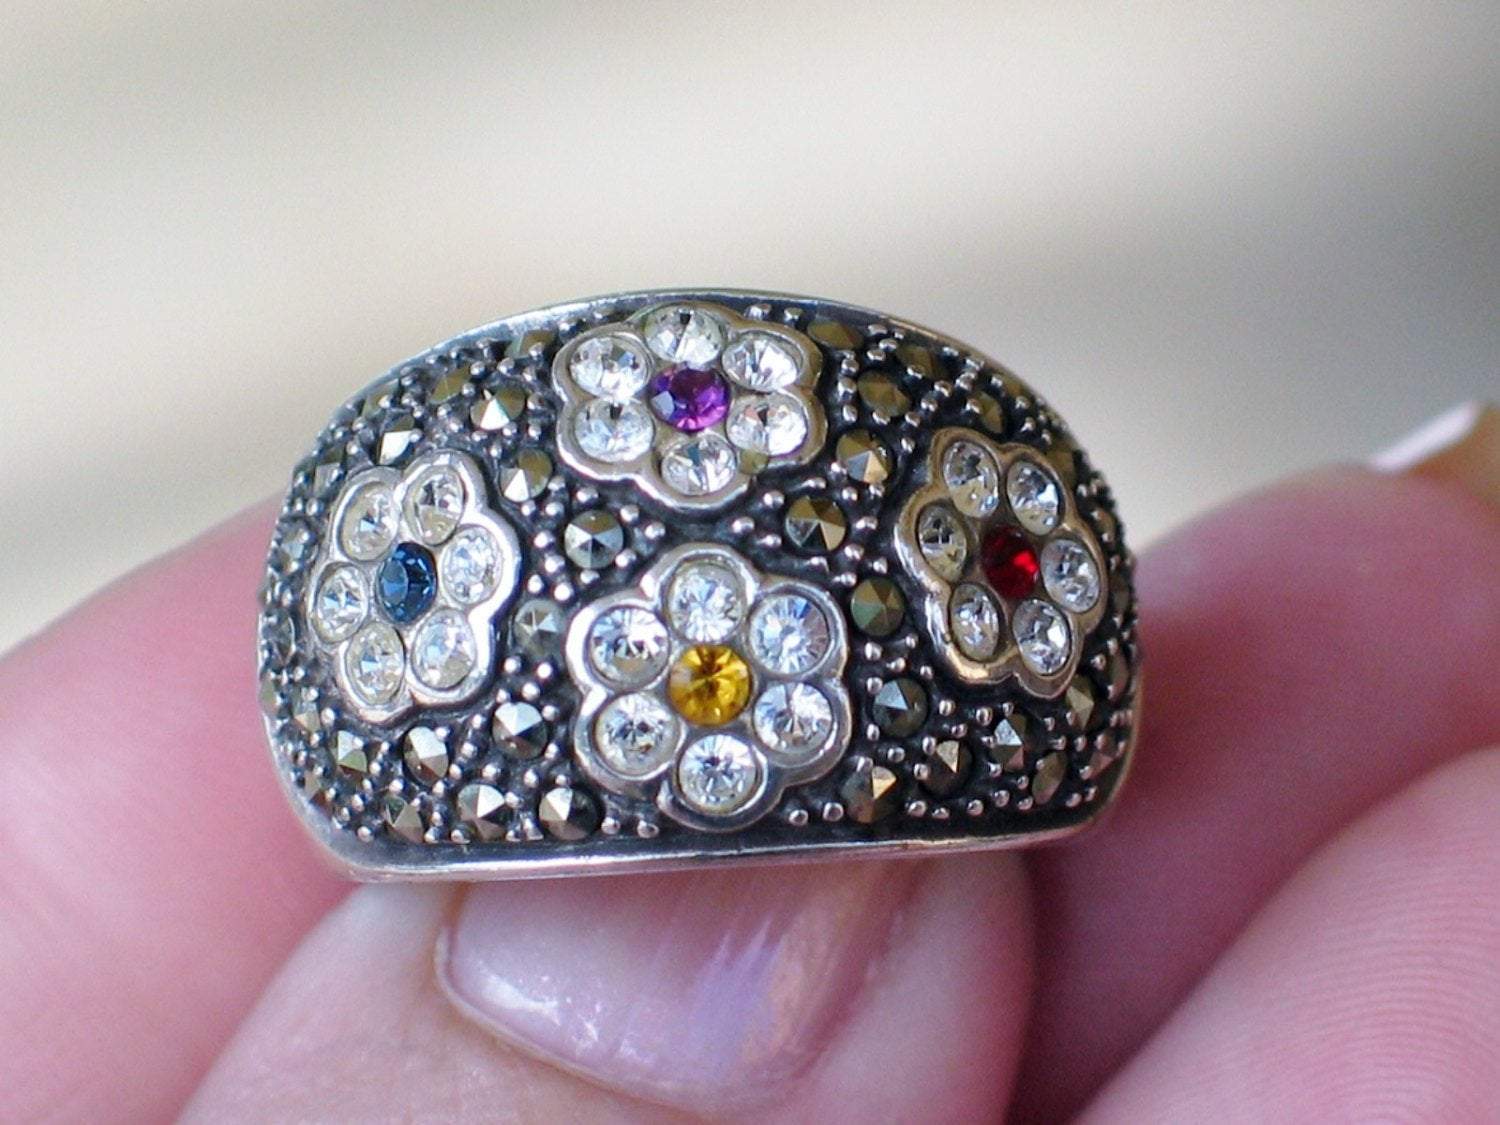 Womens Ring, Sterling Silver Ring, Pre-owned Crystal, Metallic Marcasite Flower Design Wide Band Ring